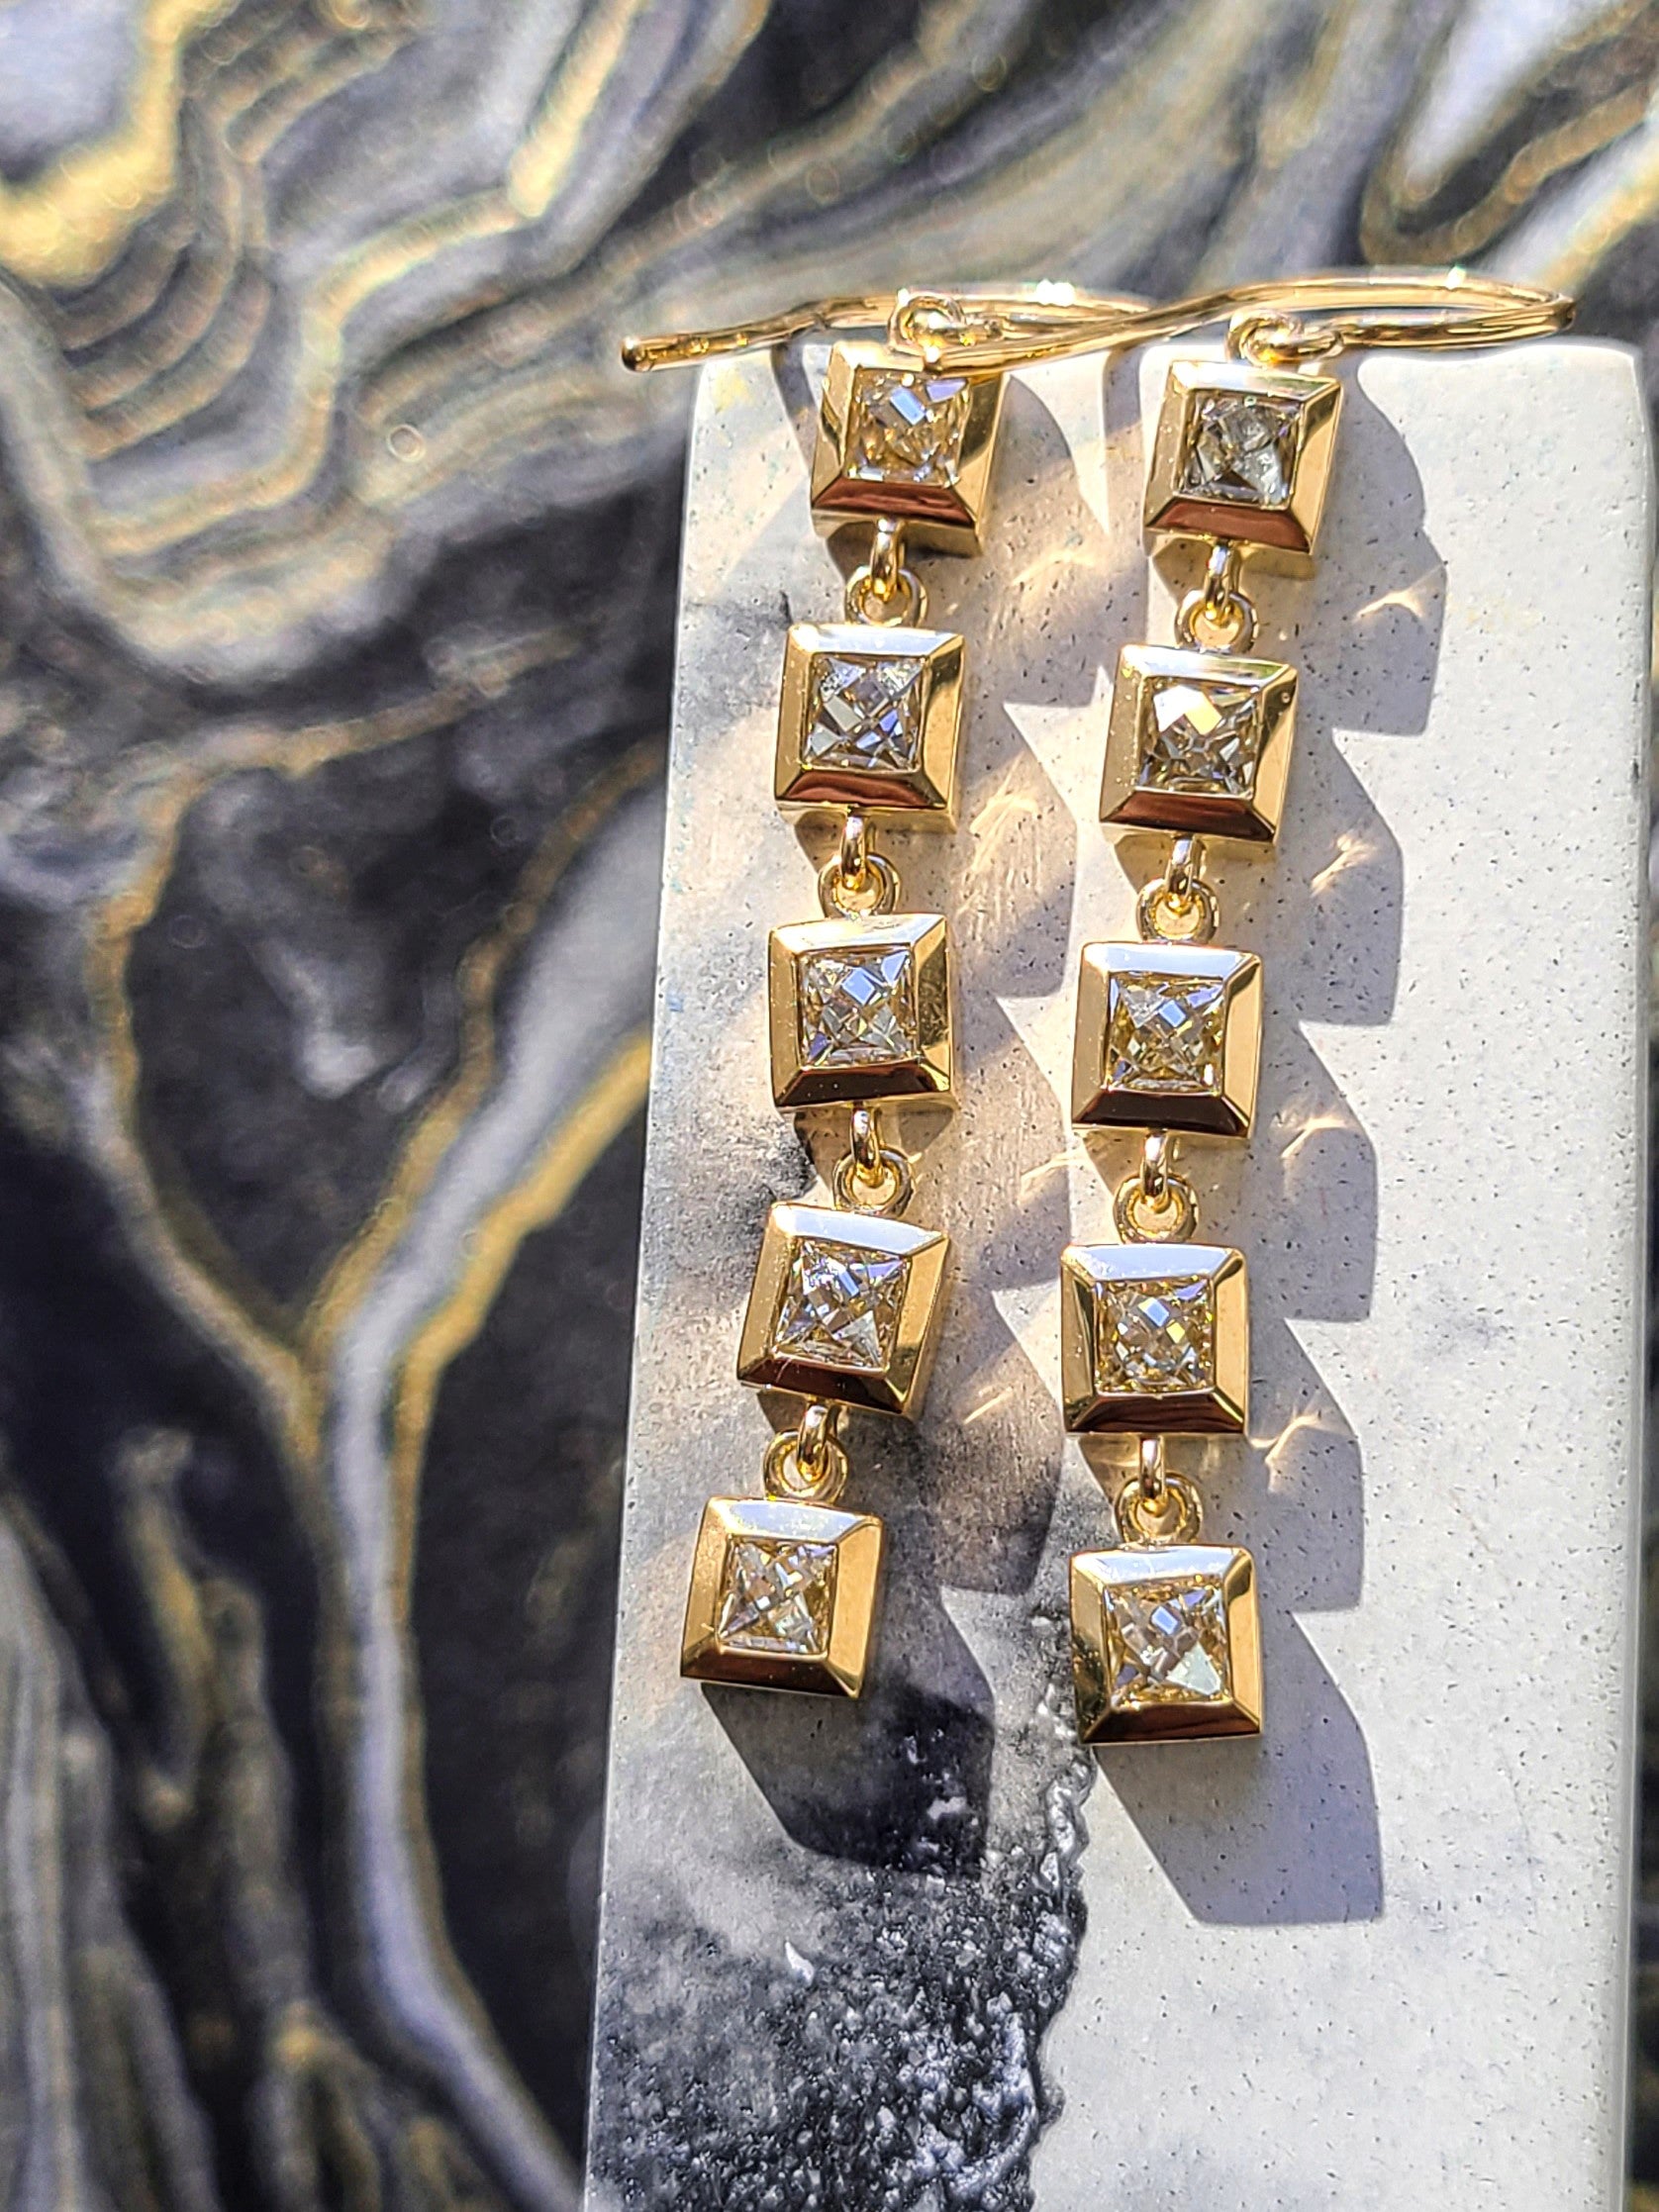 Ten French cut diamonds bezzle set in Single Stone's 'Karina' setting and linked together two create two yellow gold duster earrings